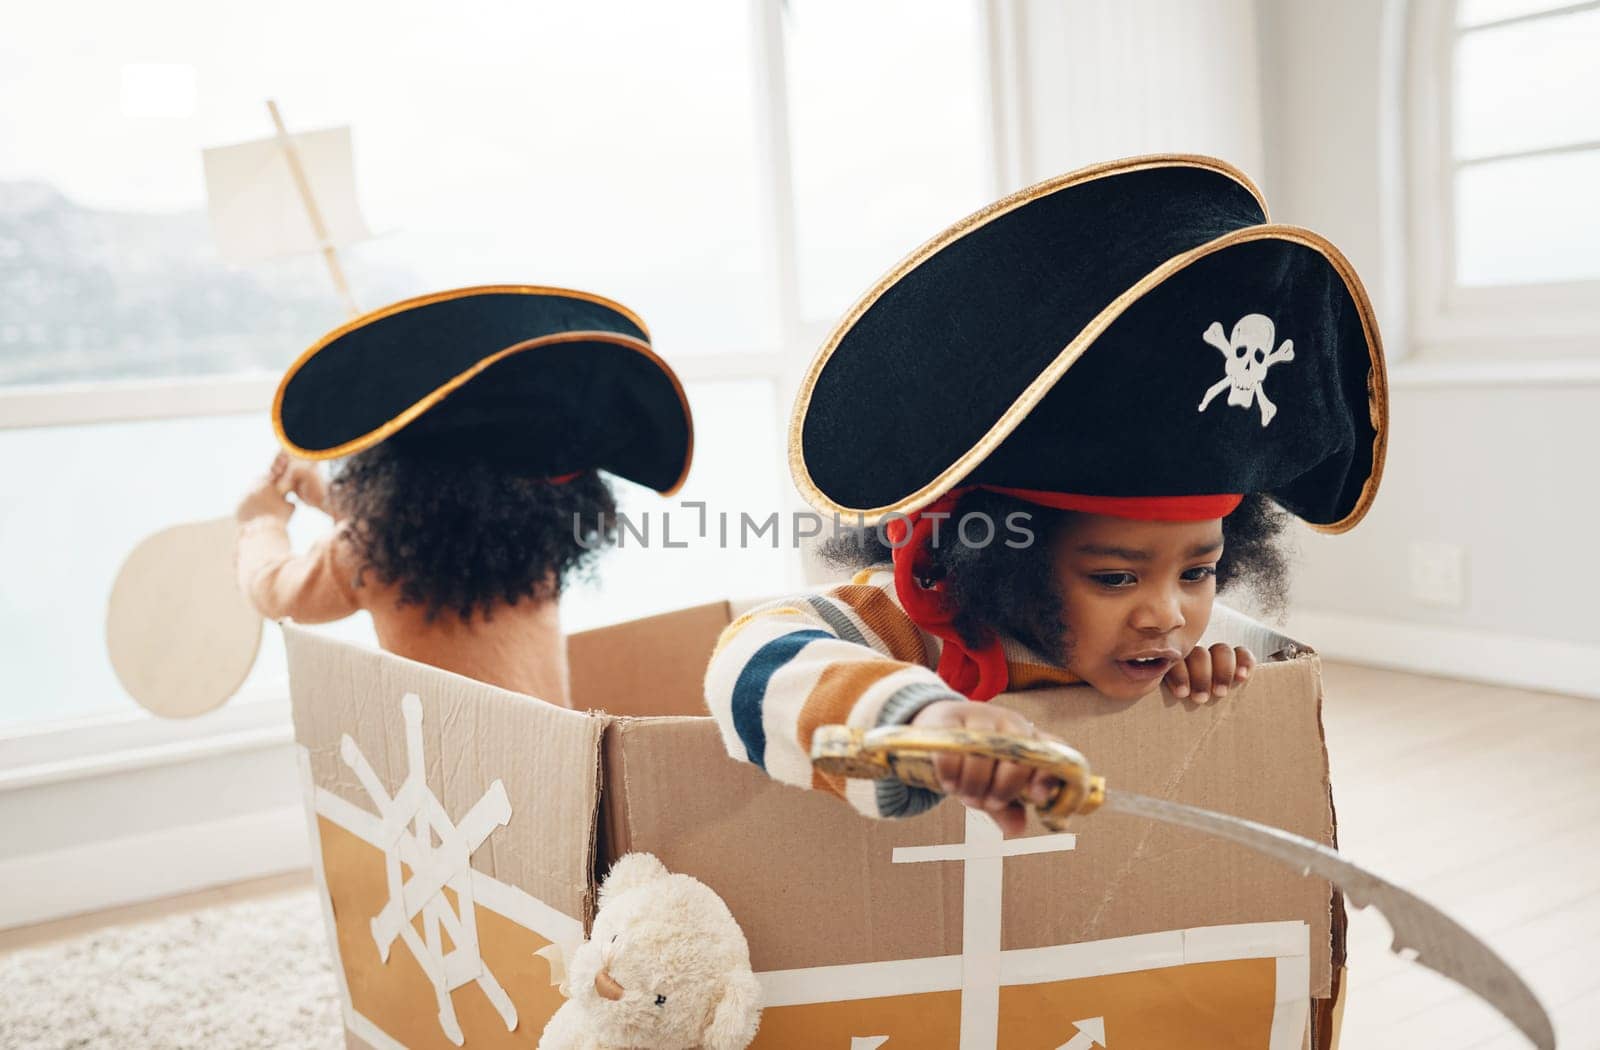 Playing, box ship and pirate children role play, fantasy imagine or pretend in cardboard container. Creative boat, fun home game or sailing black kids on Halloween cruise adventure with yacht captain by YuriArcurs